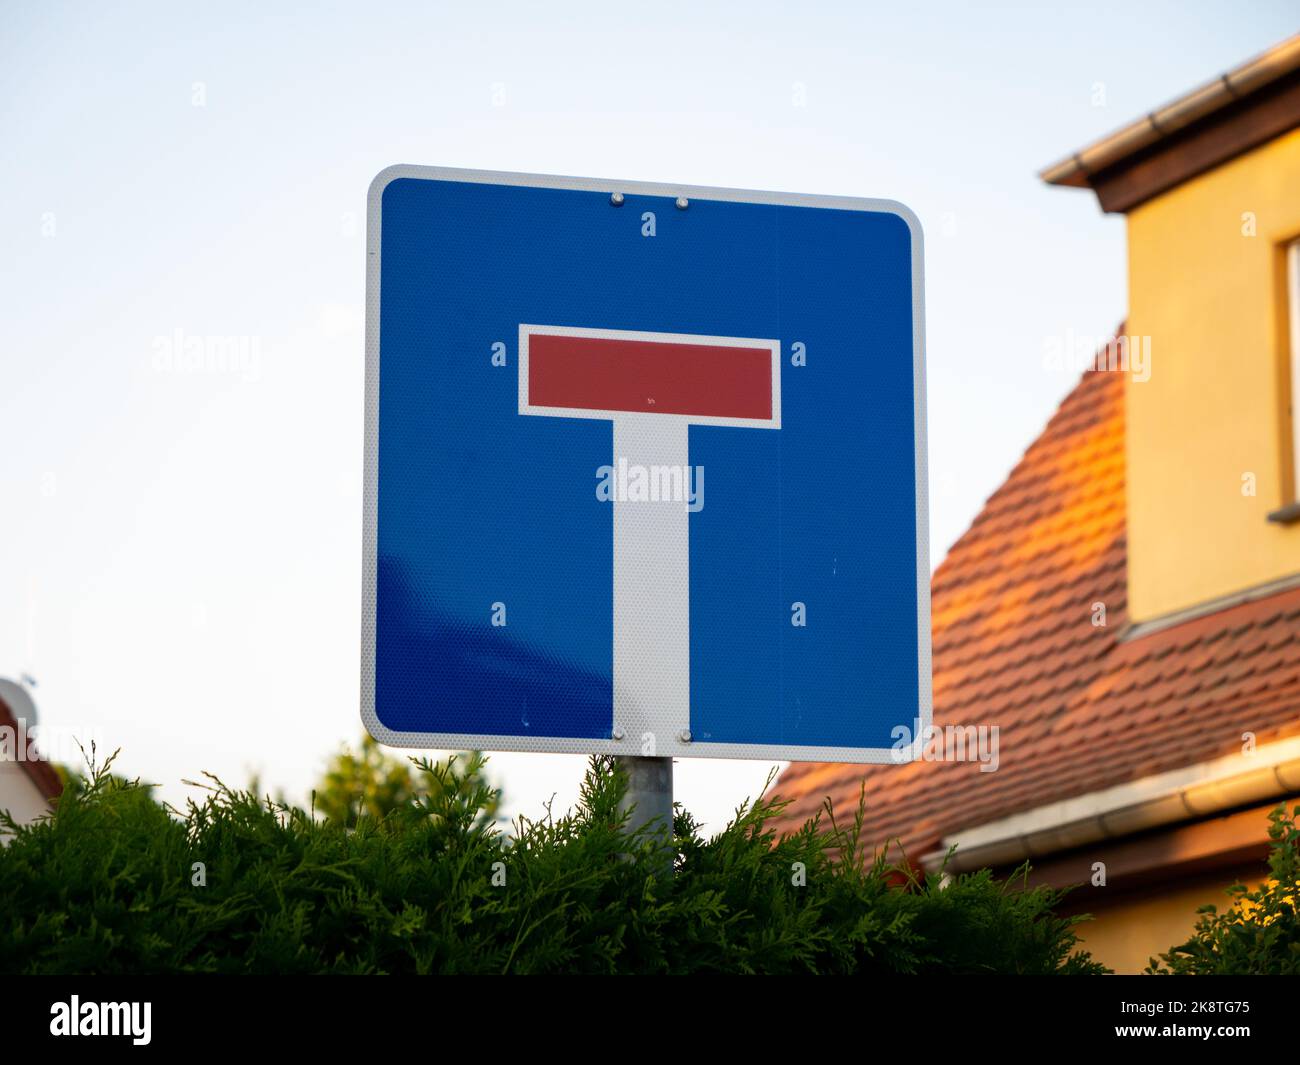 German dead end road sign. A red horizontal beam and a white beam is on a blue ground. The traffic sign is in a square shape. The street is ending. Stock Photo